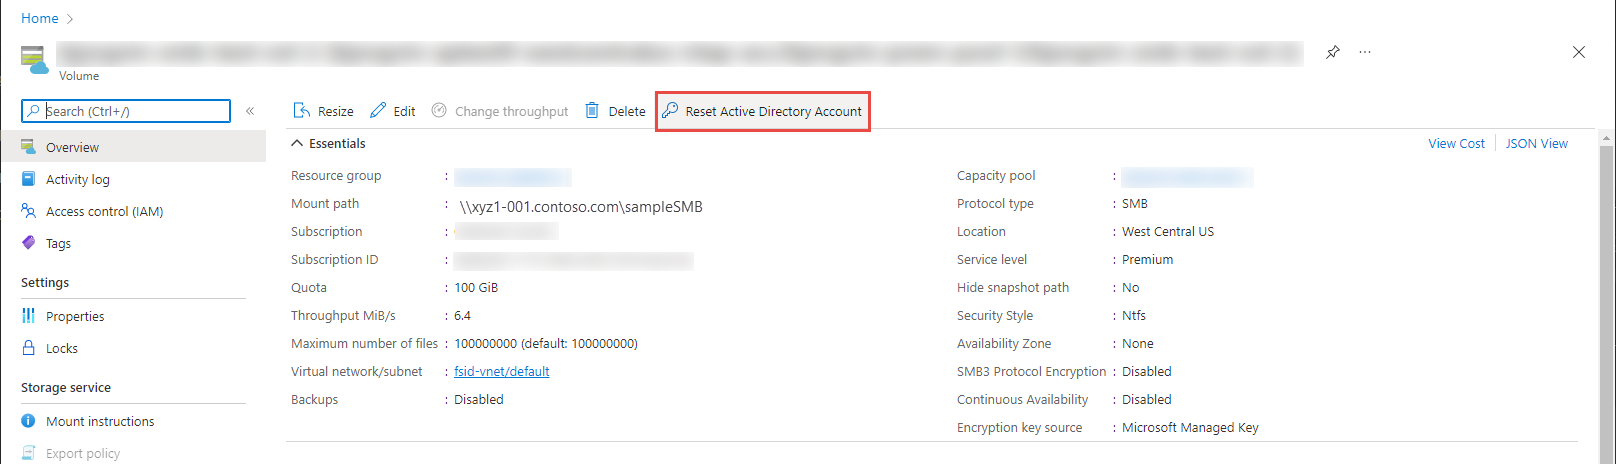 Azure Volume Overview interface with the Reset Active Directory Account button highlighted.